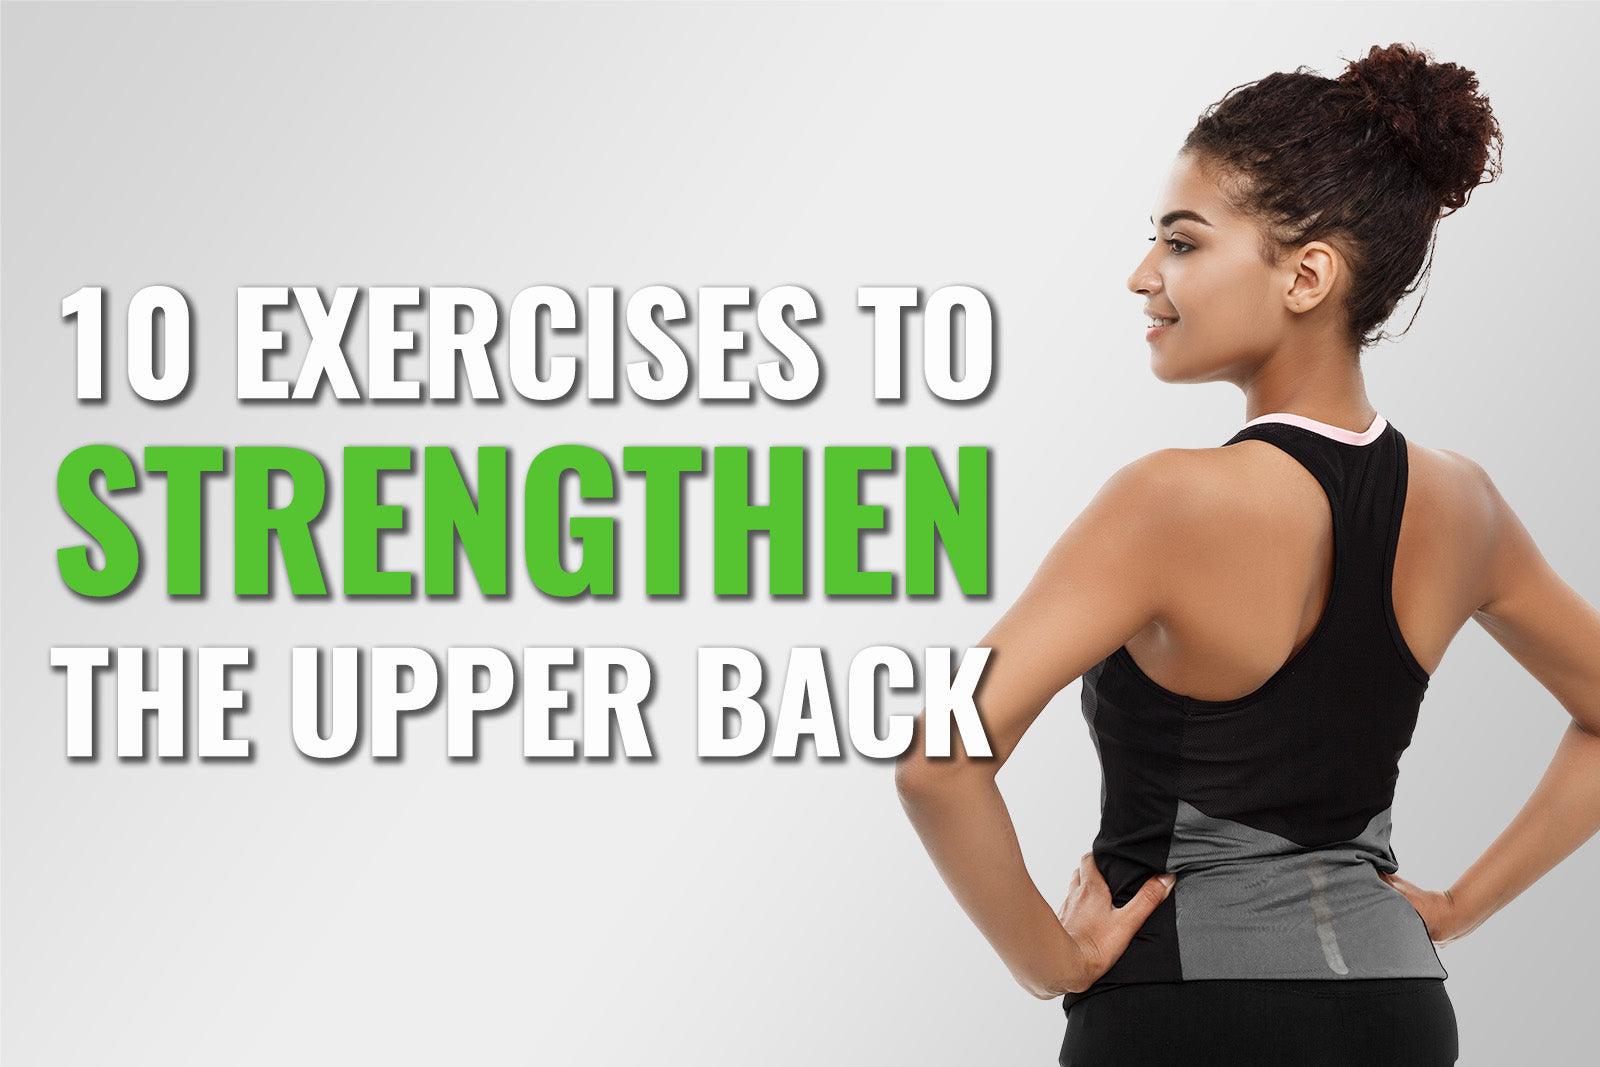 Improve Your Posture and Strengthen Your Upper Back with These